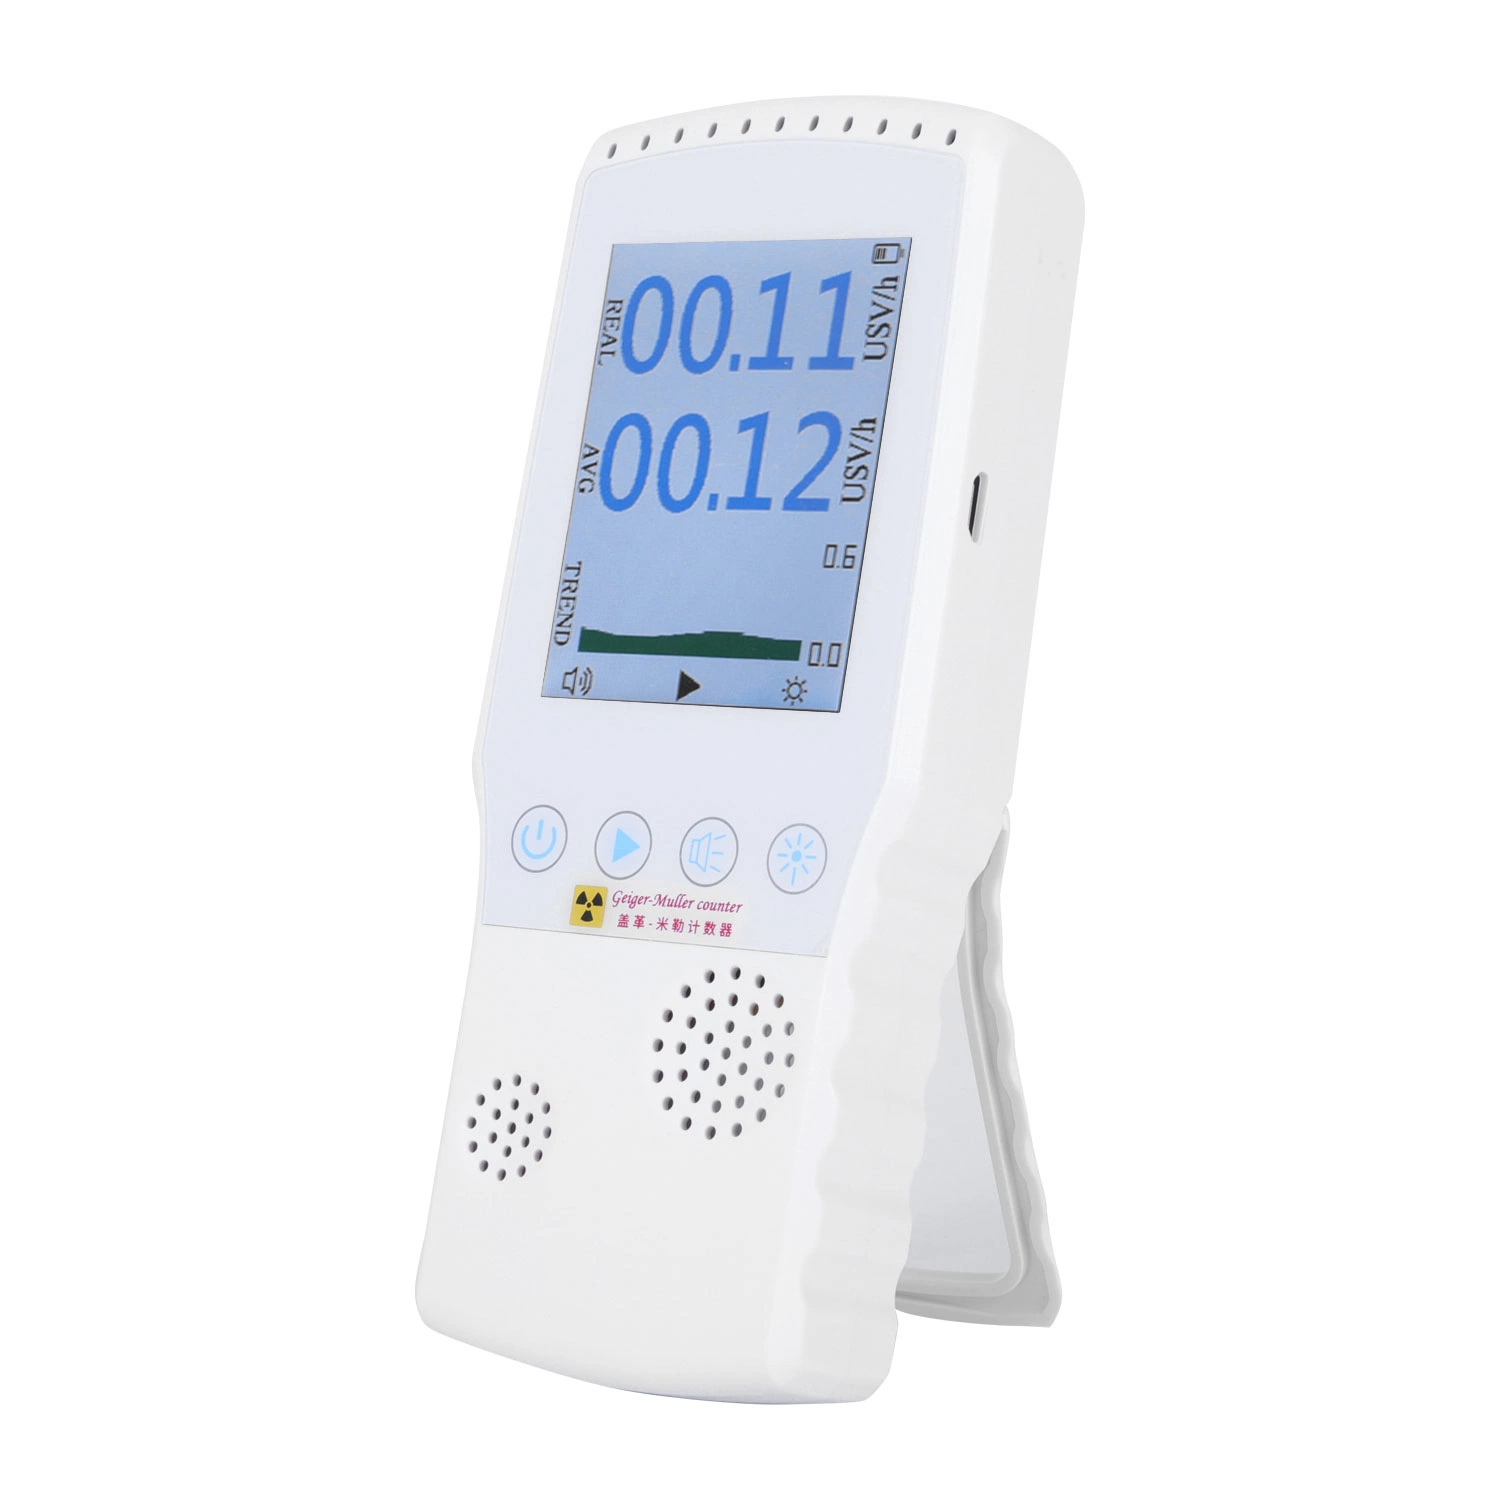 Geiger Counter Nuclear Radiation Detector Personal Dosimeter with LCD Display Portable High Accuracy Beta Gamma X-ray Food Radiation Meter Monitor Radiometer Fo